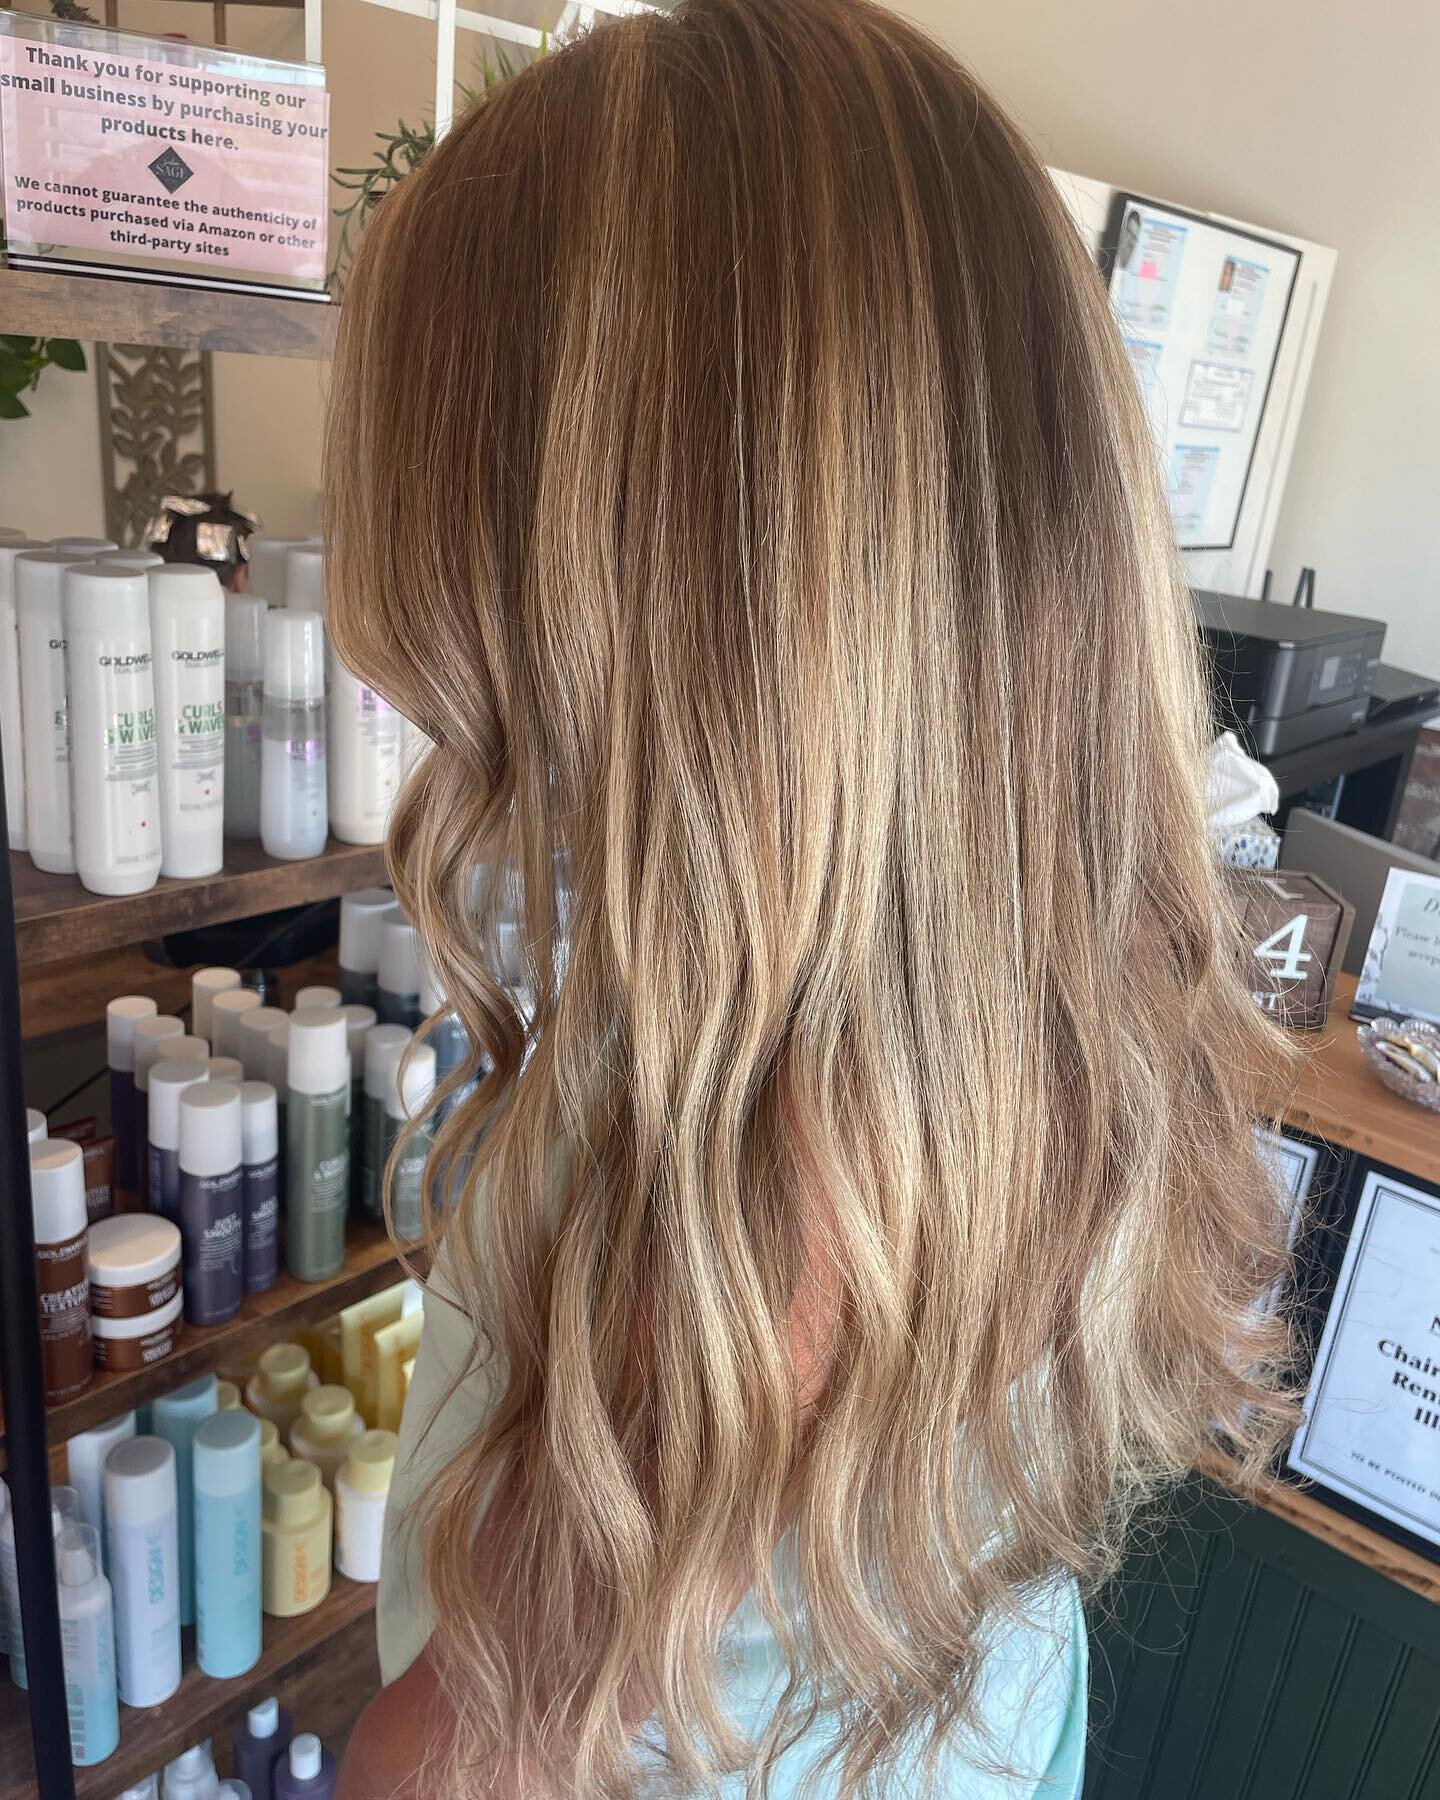 Soft airbrushed blonde by Rachelle Hearst 

Call us at 856.624.9140 to book your appointment. 

#goldwell #goldwellcolor #goldwellapprovedus #goldwellcolorance #goldwellpurepigments #goldwelltopchic #goldwellsalon #njsalon #njstylist #behindthechair 